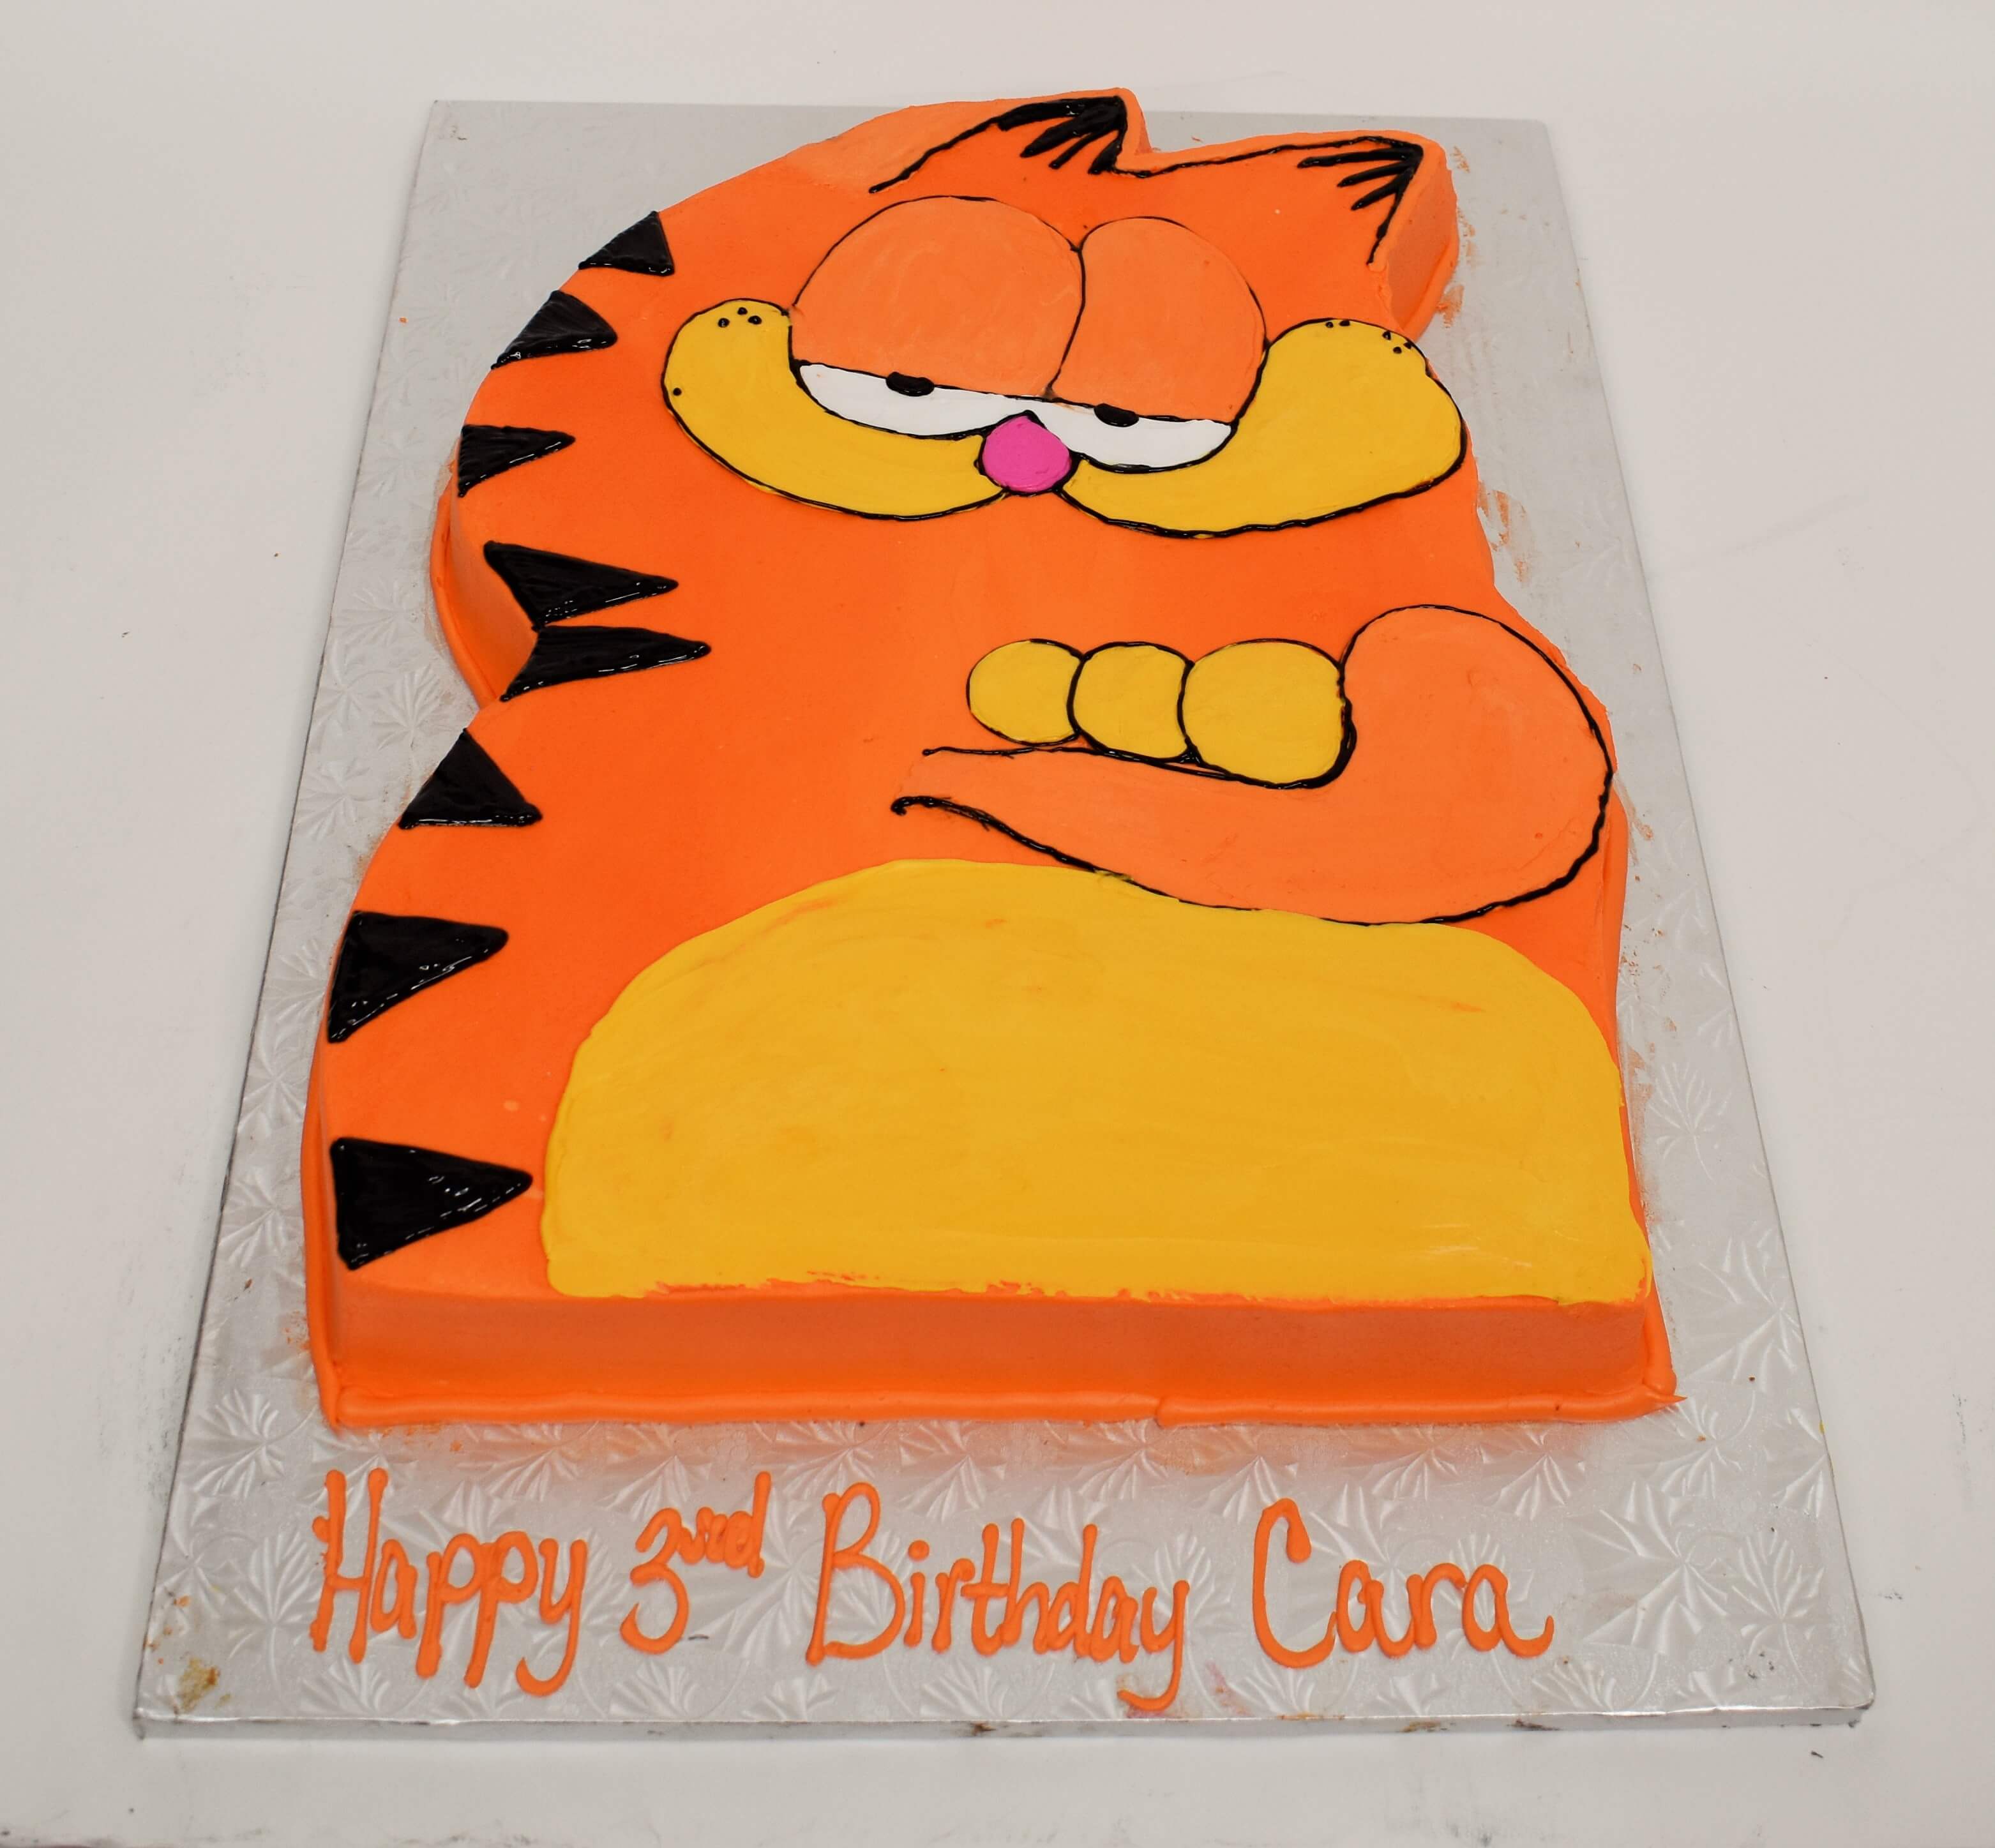 McArthur's Bakery Custom Cake with a Cut Out of Garfield the Cat